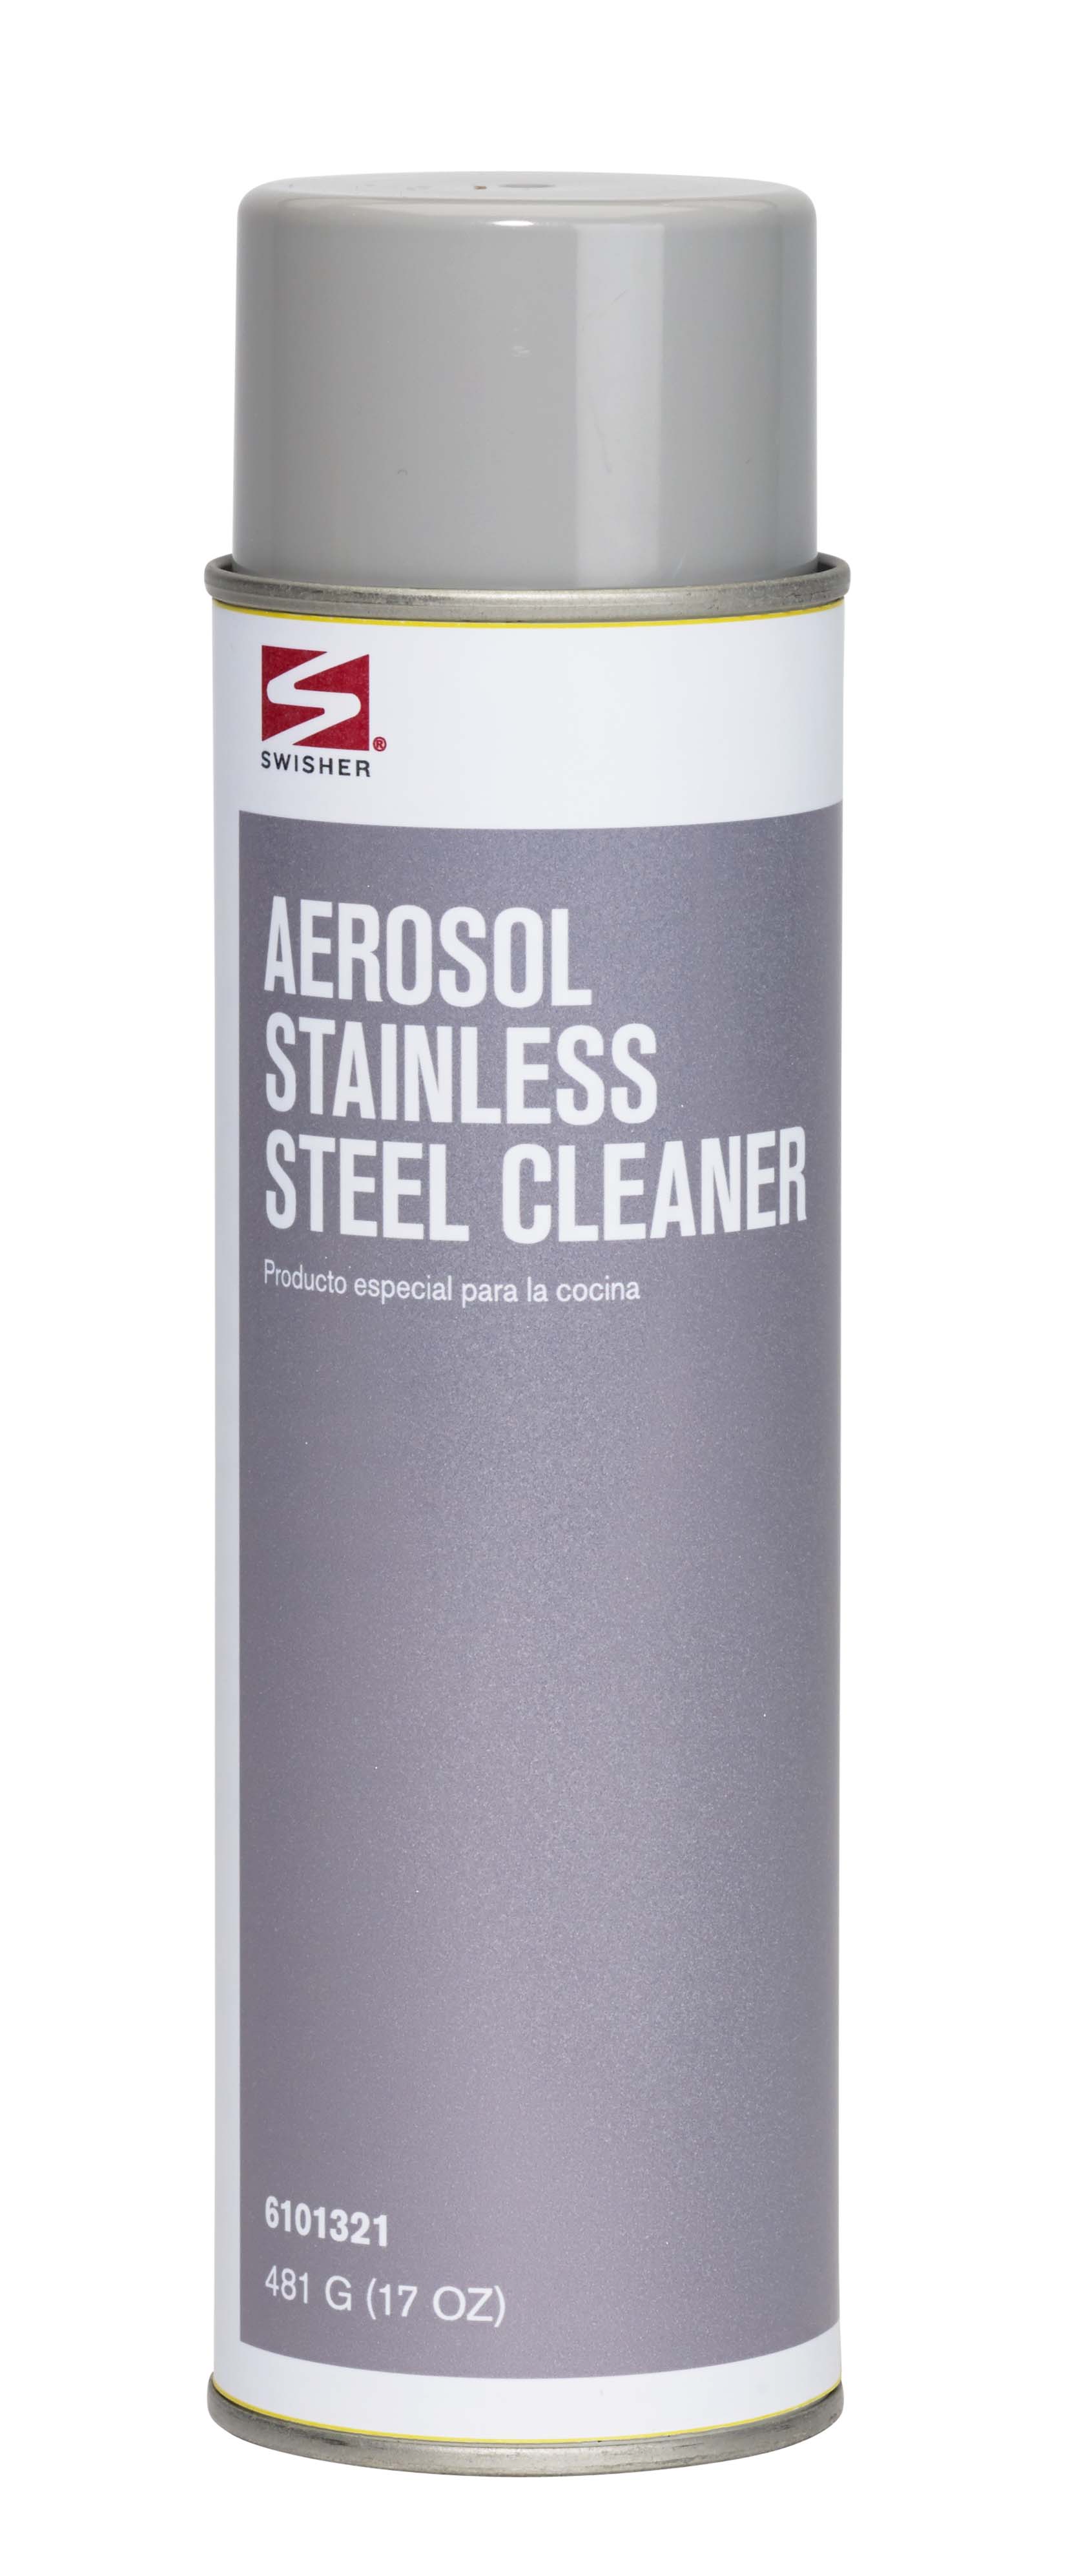 Stainless Steel Cleaner and Polish – DiamondCore Tools